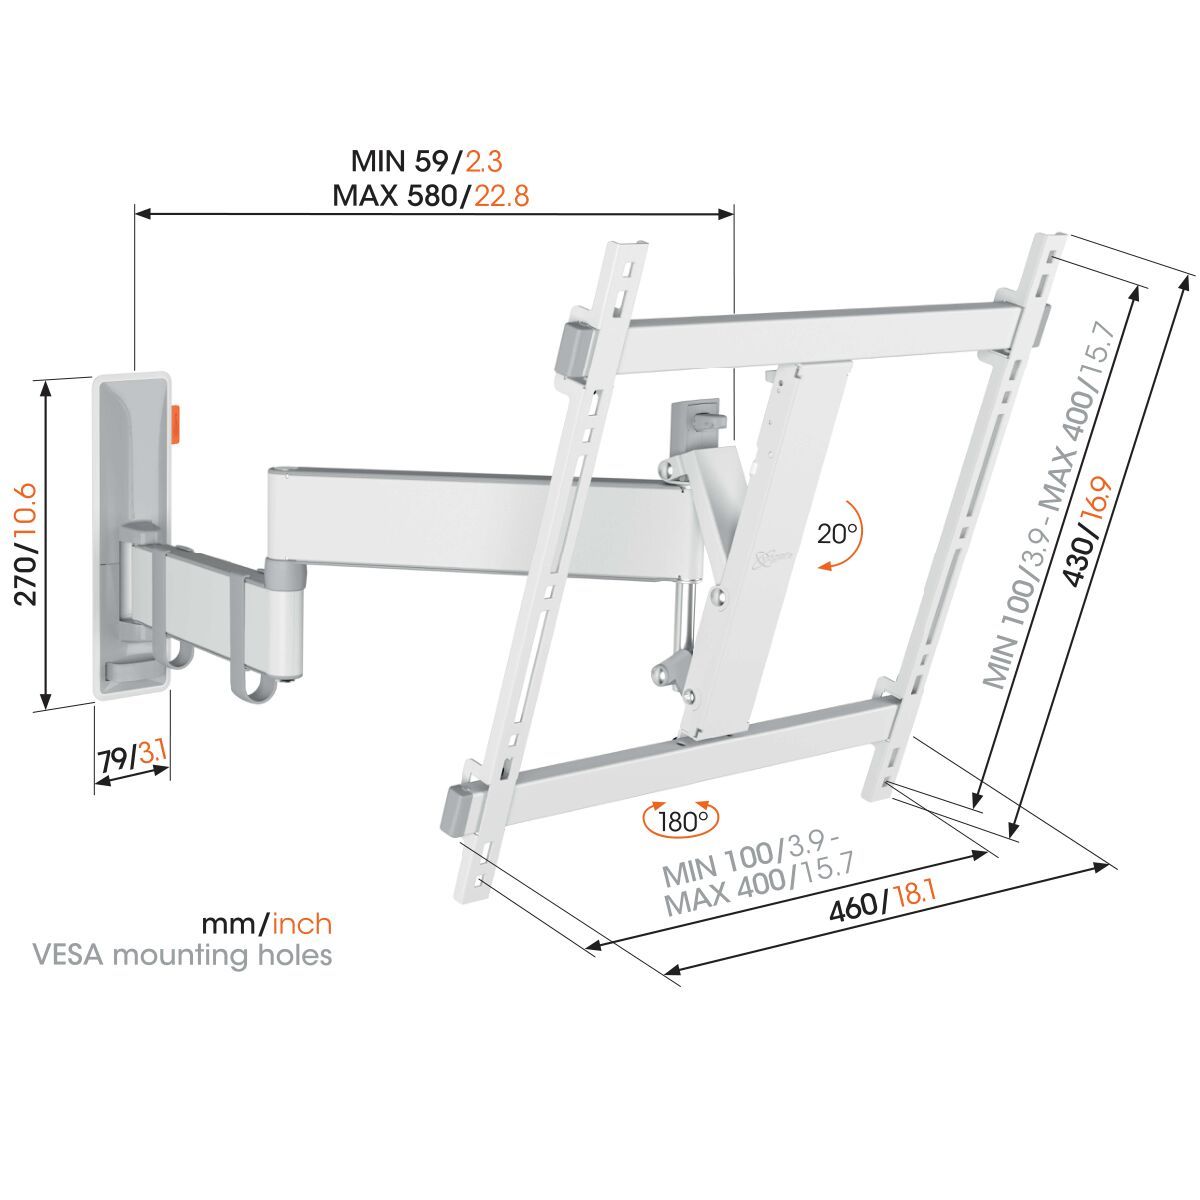 Vogel's TVM 3445 Full-Motion TV Wall Mount (white) - Suitable for 32 up to 65 inch TVs - Full motion (up to 180°) swivel - Tilt up to 20° - Dimensions